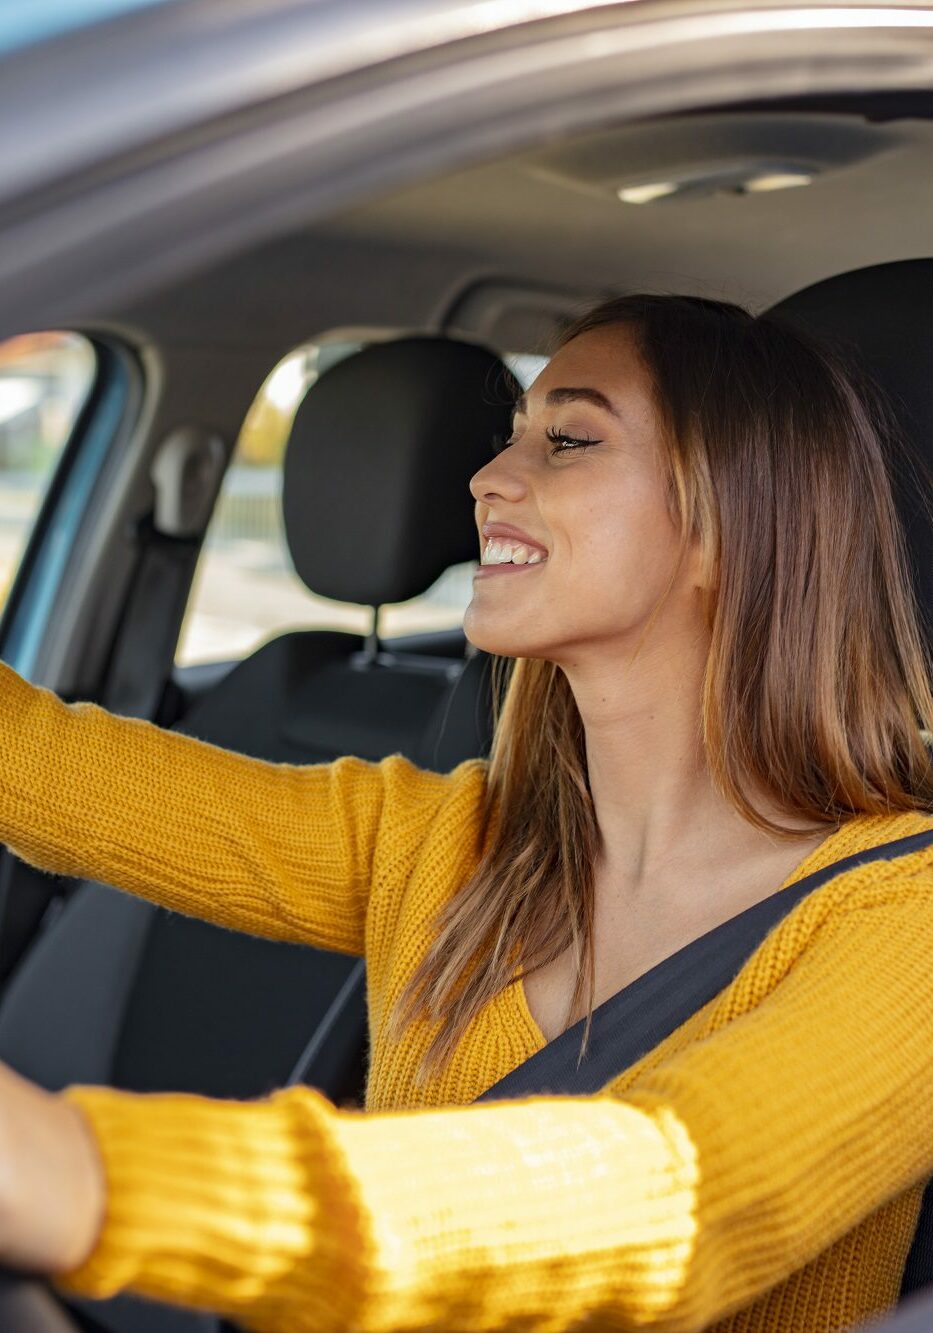 Beautiful female Driver adjusting the Rear Mirror looking at herself. Adjusting the rear view mirror. Woman adjusts the rear view mirror with her hand. Happy young woman driver looking adjusting rear view car mirror